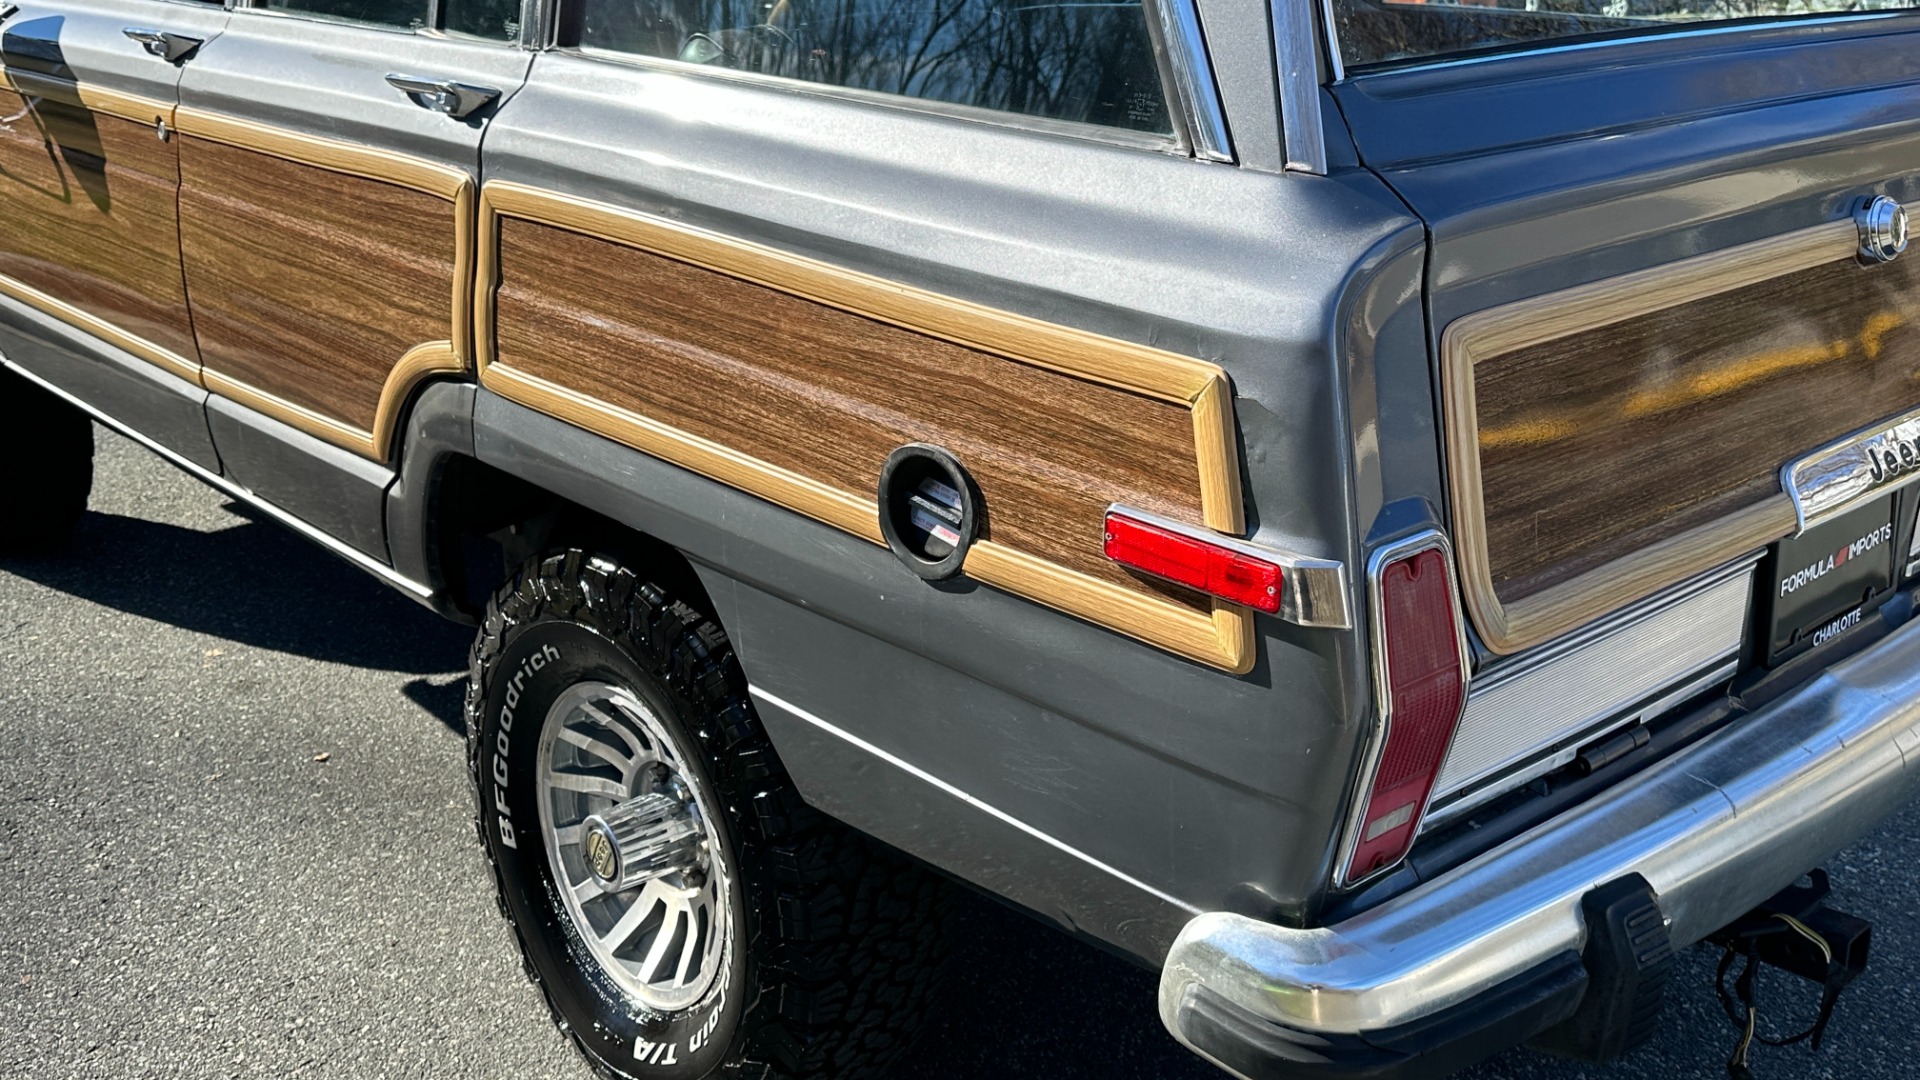 Used 1988 Jeep Grand Wagoneer 5.9L V8 ENGINE / LEATHER AND CLOTH / WOOD SIDING / 4WD for sale $21,995 at Formula Imports in Charlotte NC 28227 27